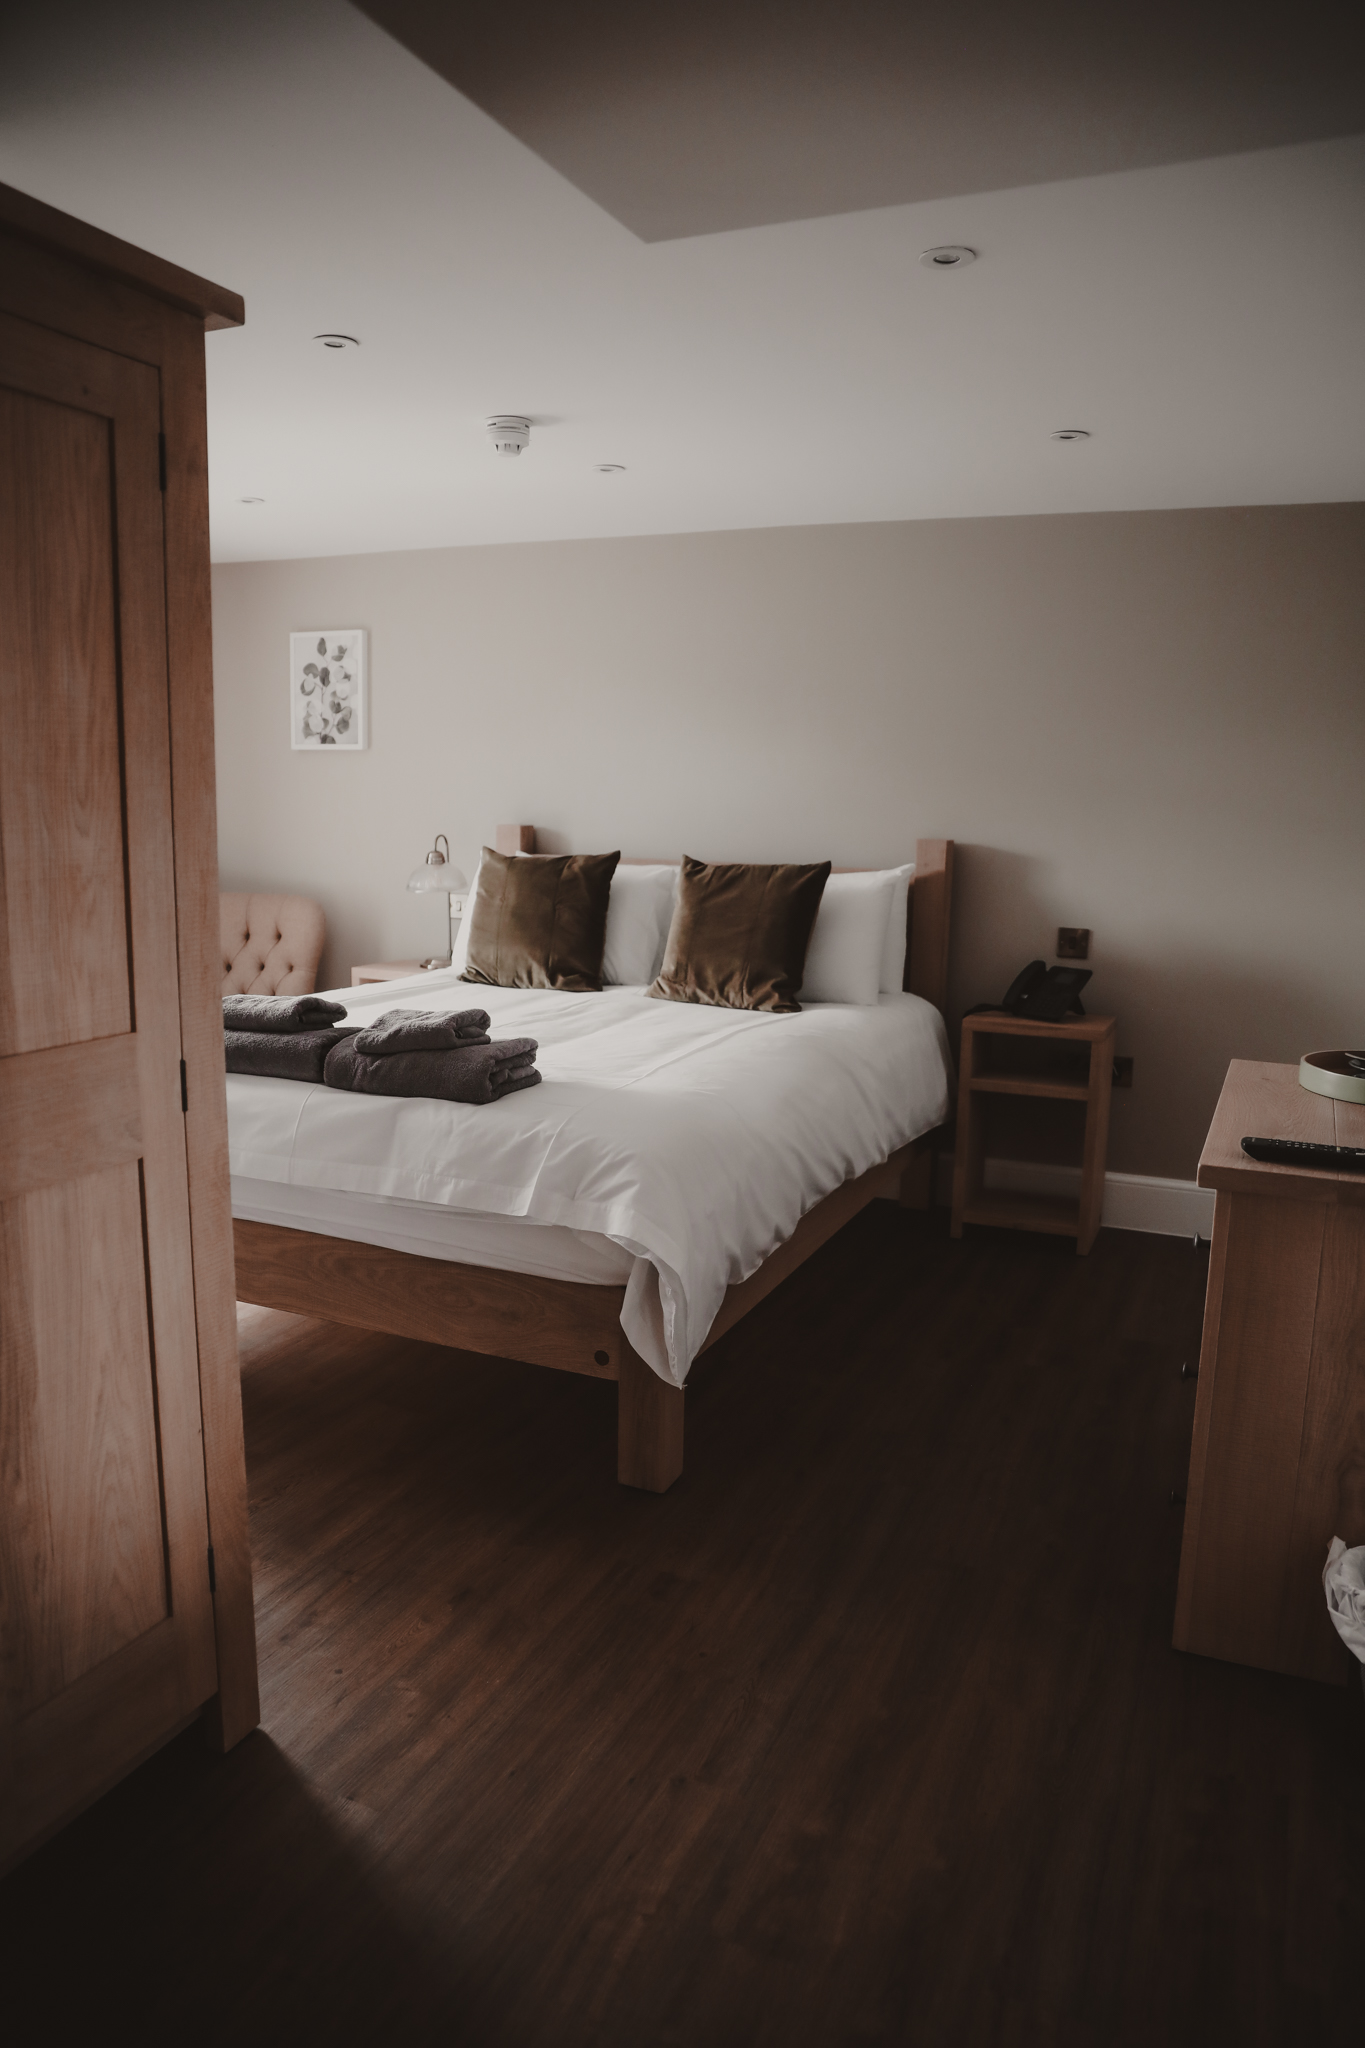 large bedroom with wooden floors and a double bed